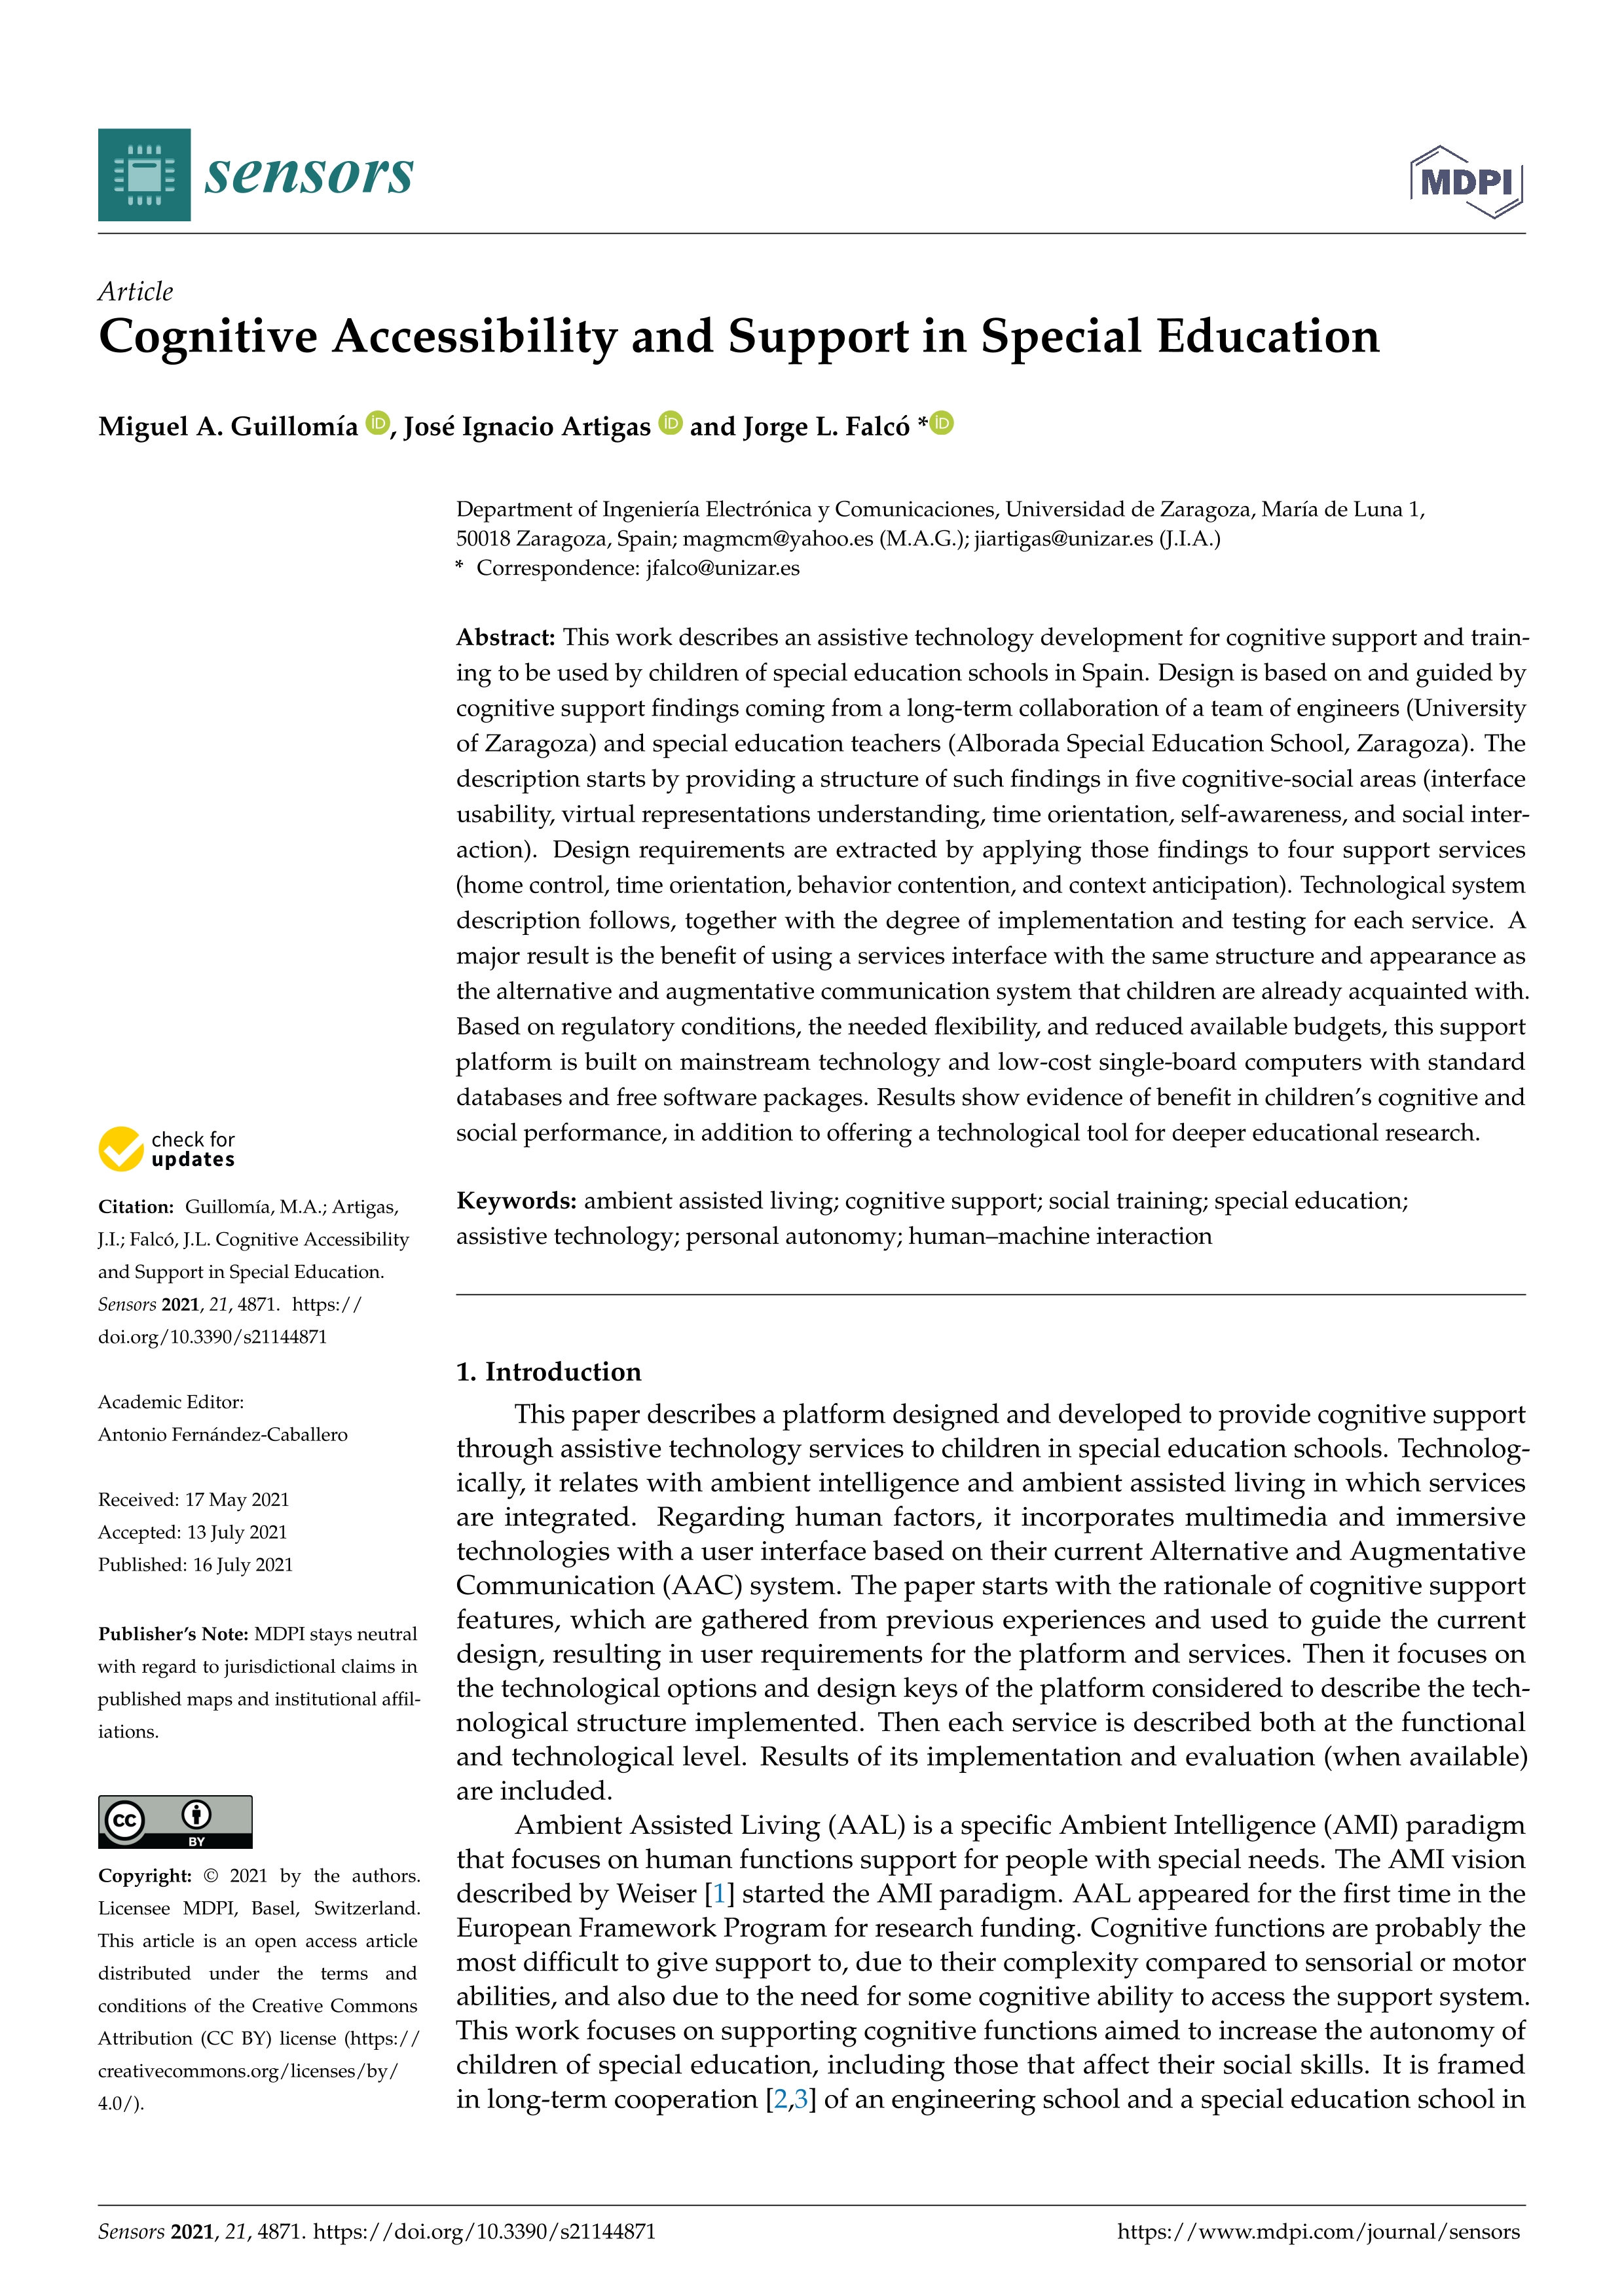 Cognitive accessibility and support in special education